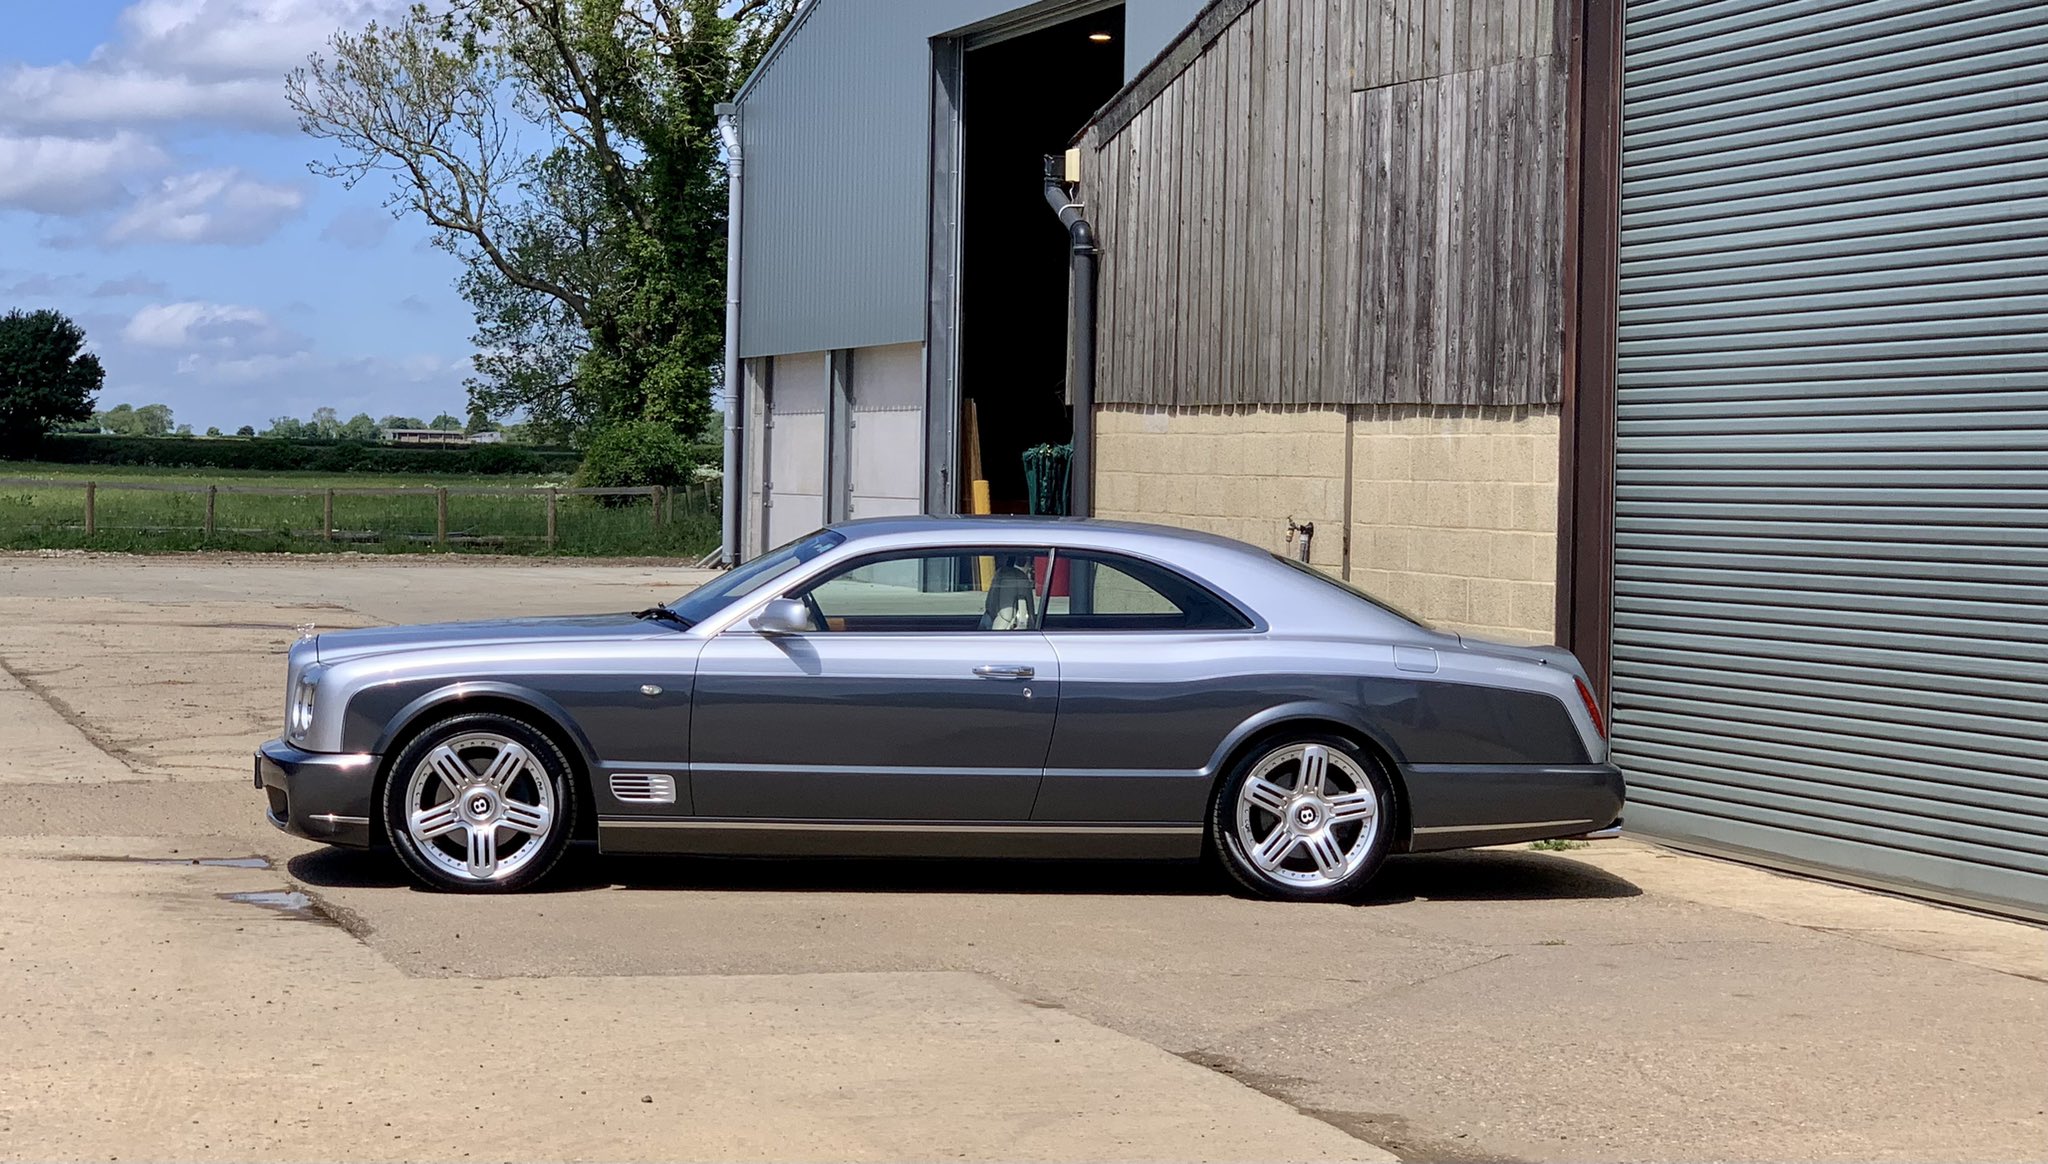 Andy Grover on Twitter: "Came across this lovely Bentley Brooklands today -  colour scheme accentuates shape. https://t.co/lZ87AaeGNm" / Twitter